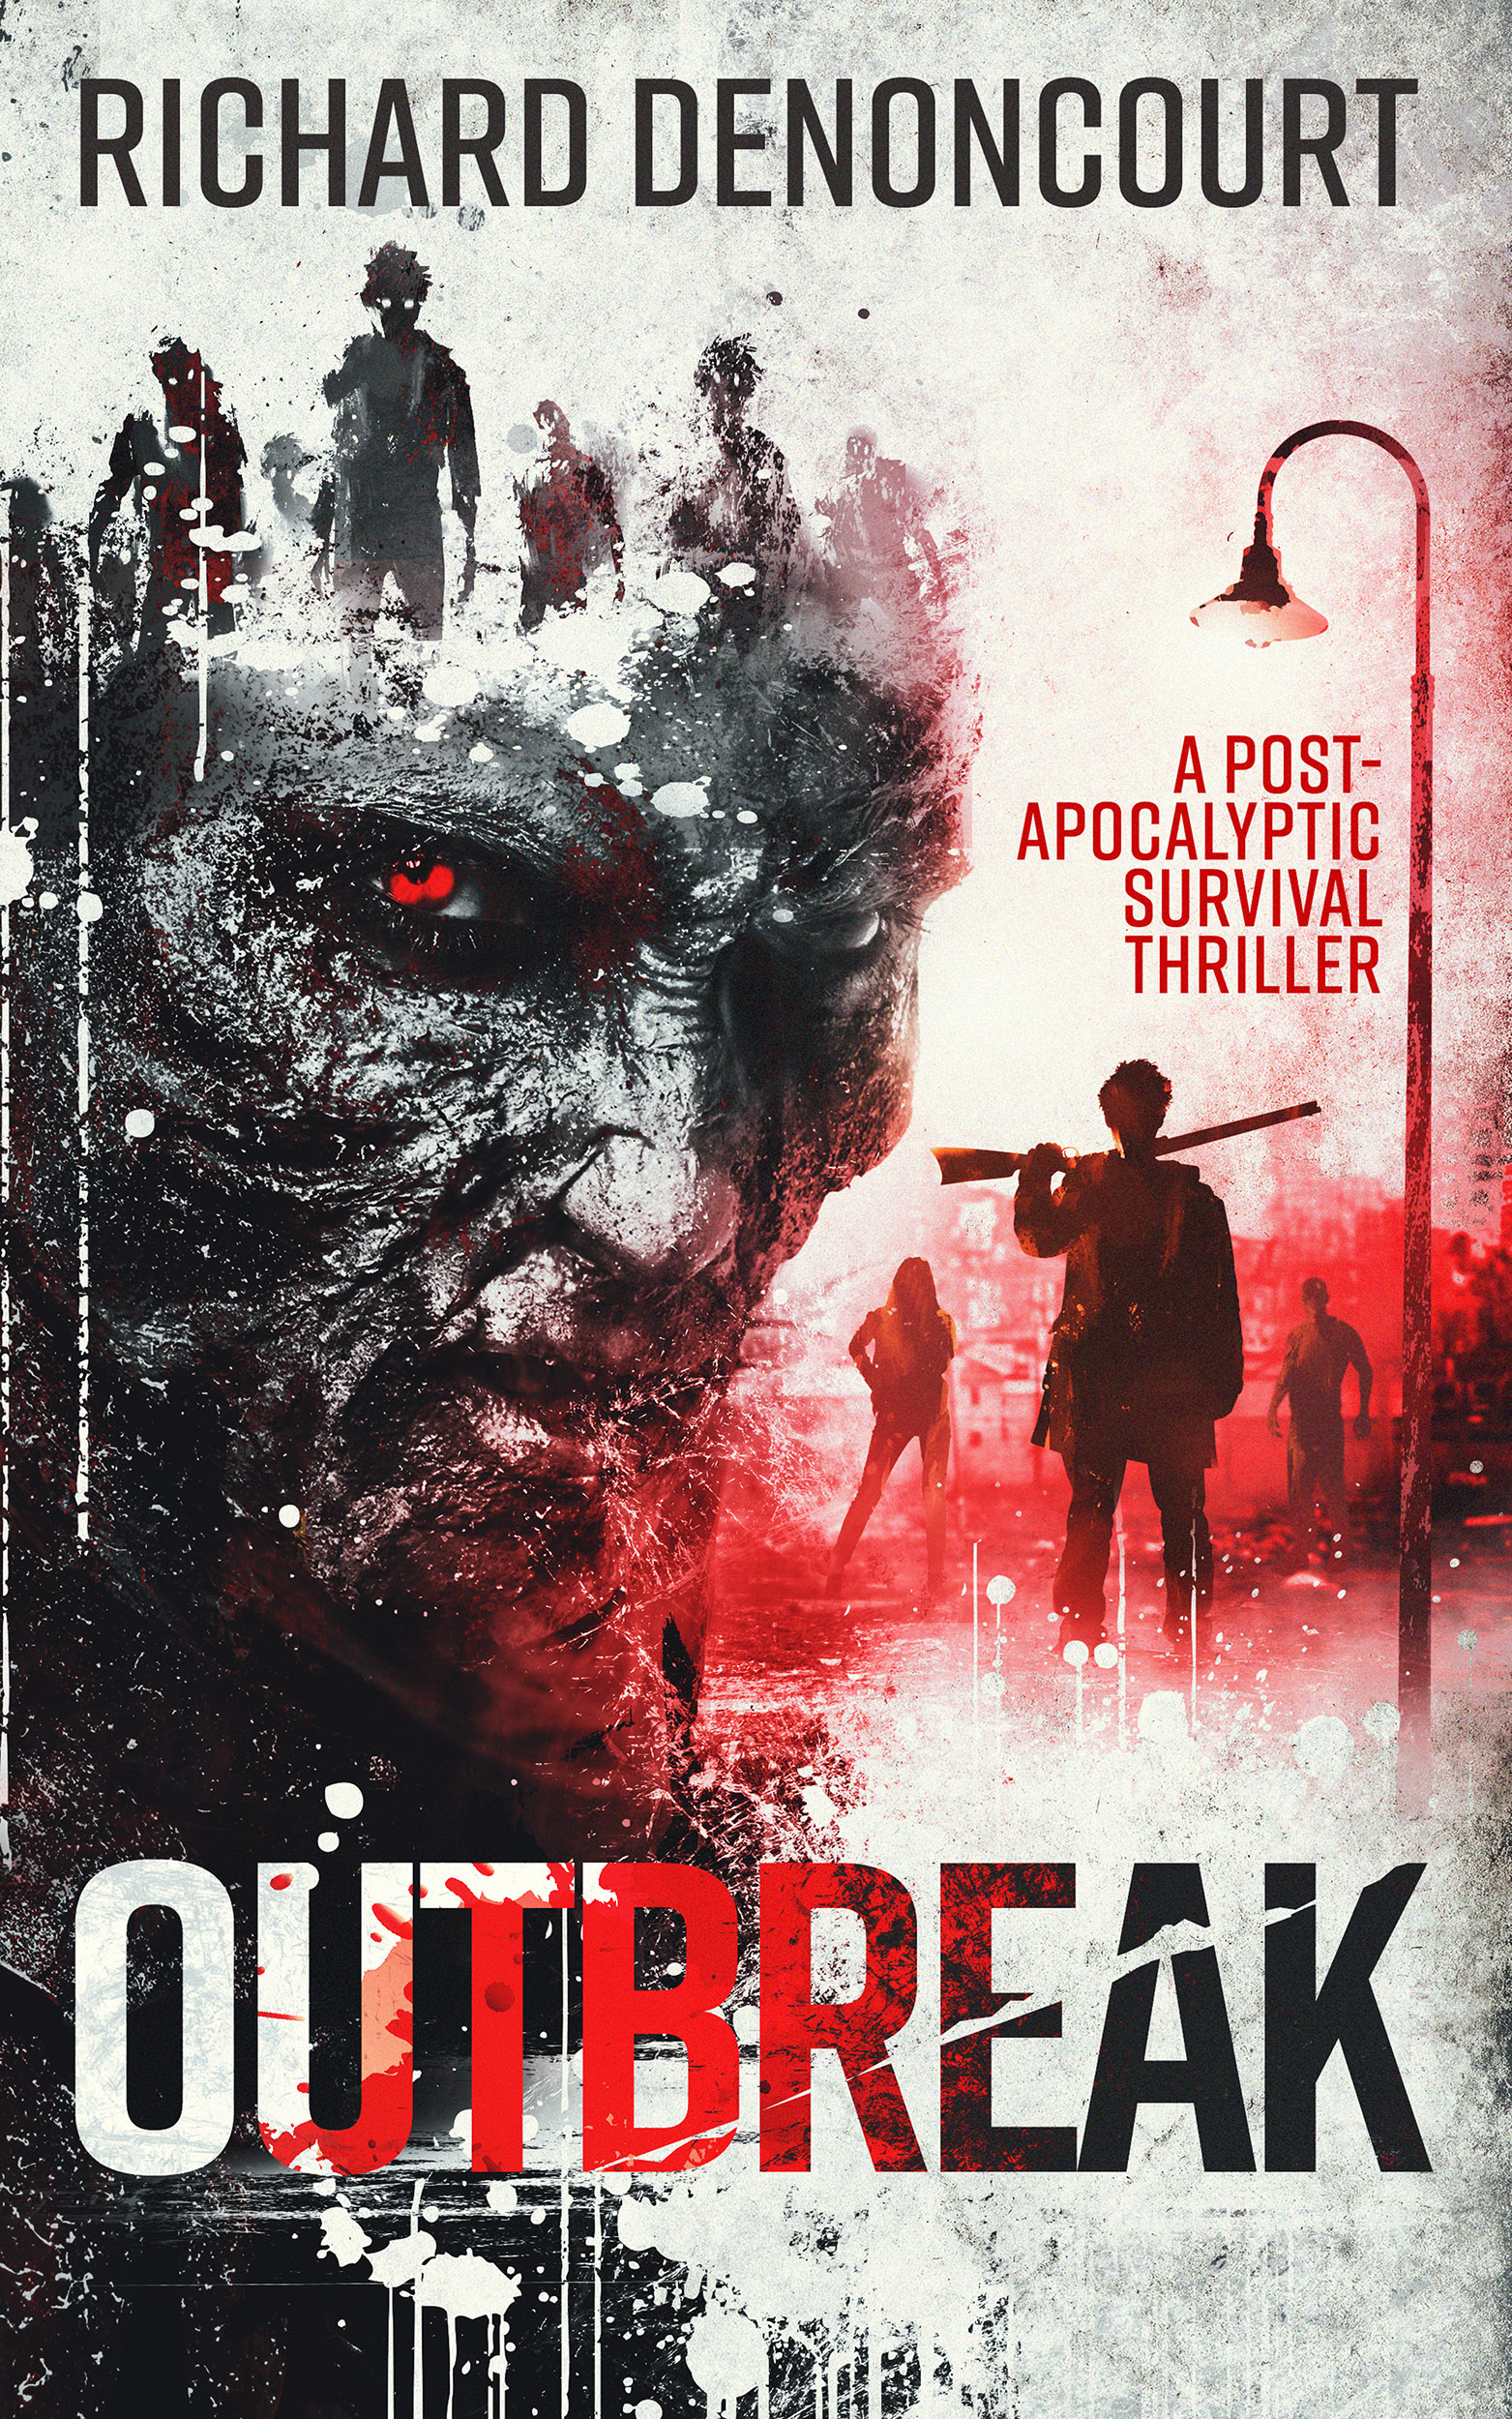 FREE: Outbreak: A Survival Horror Thriller by Richard Denoncourt